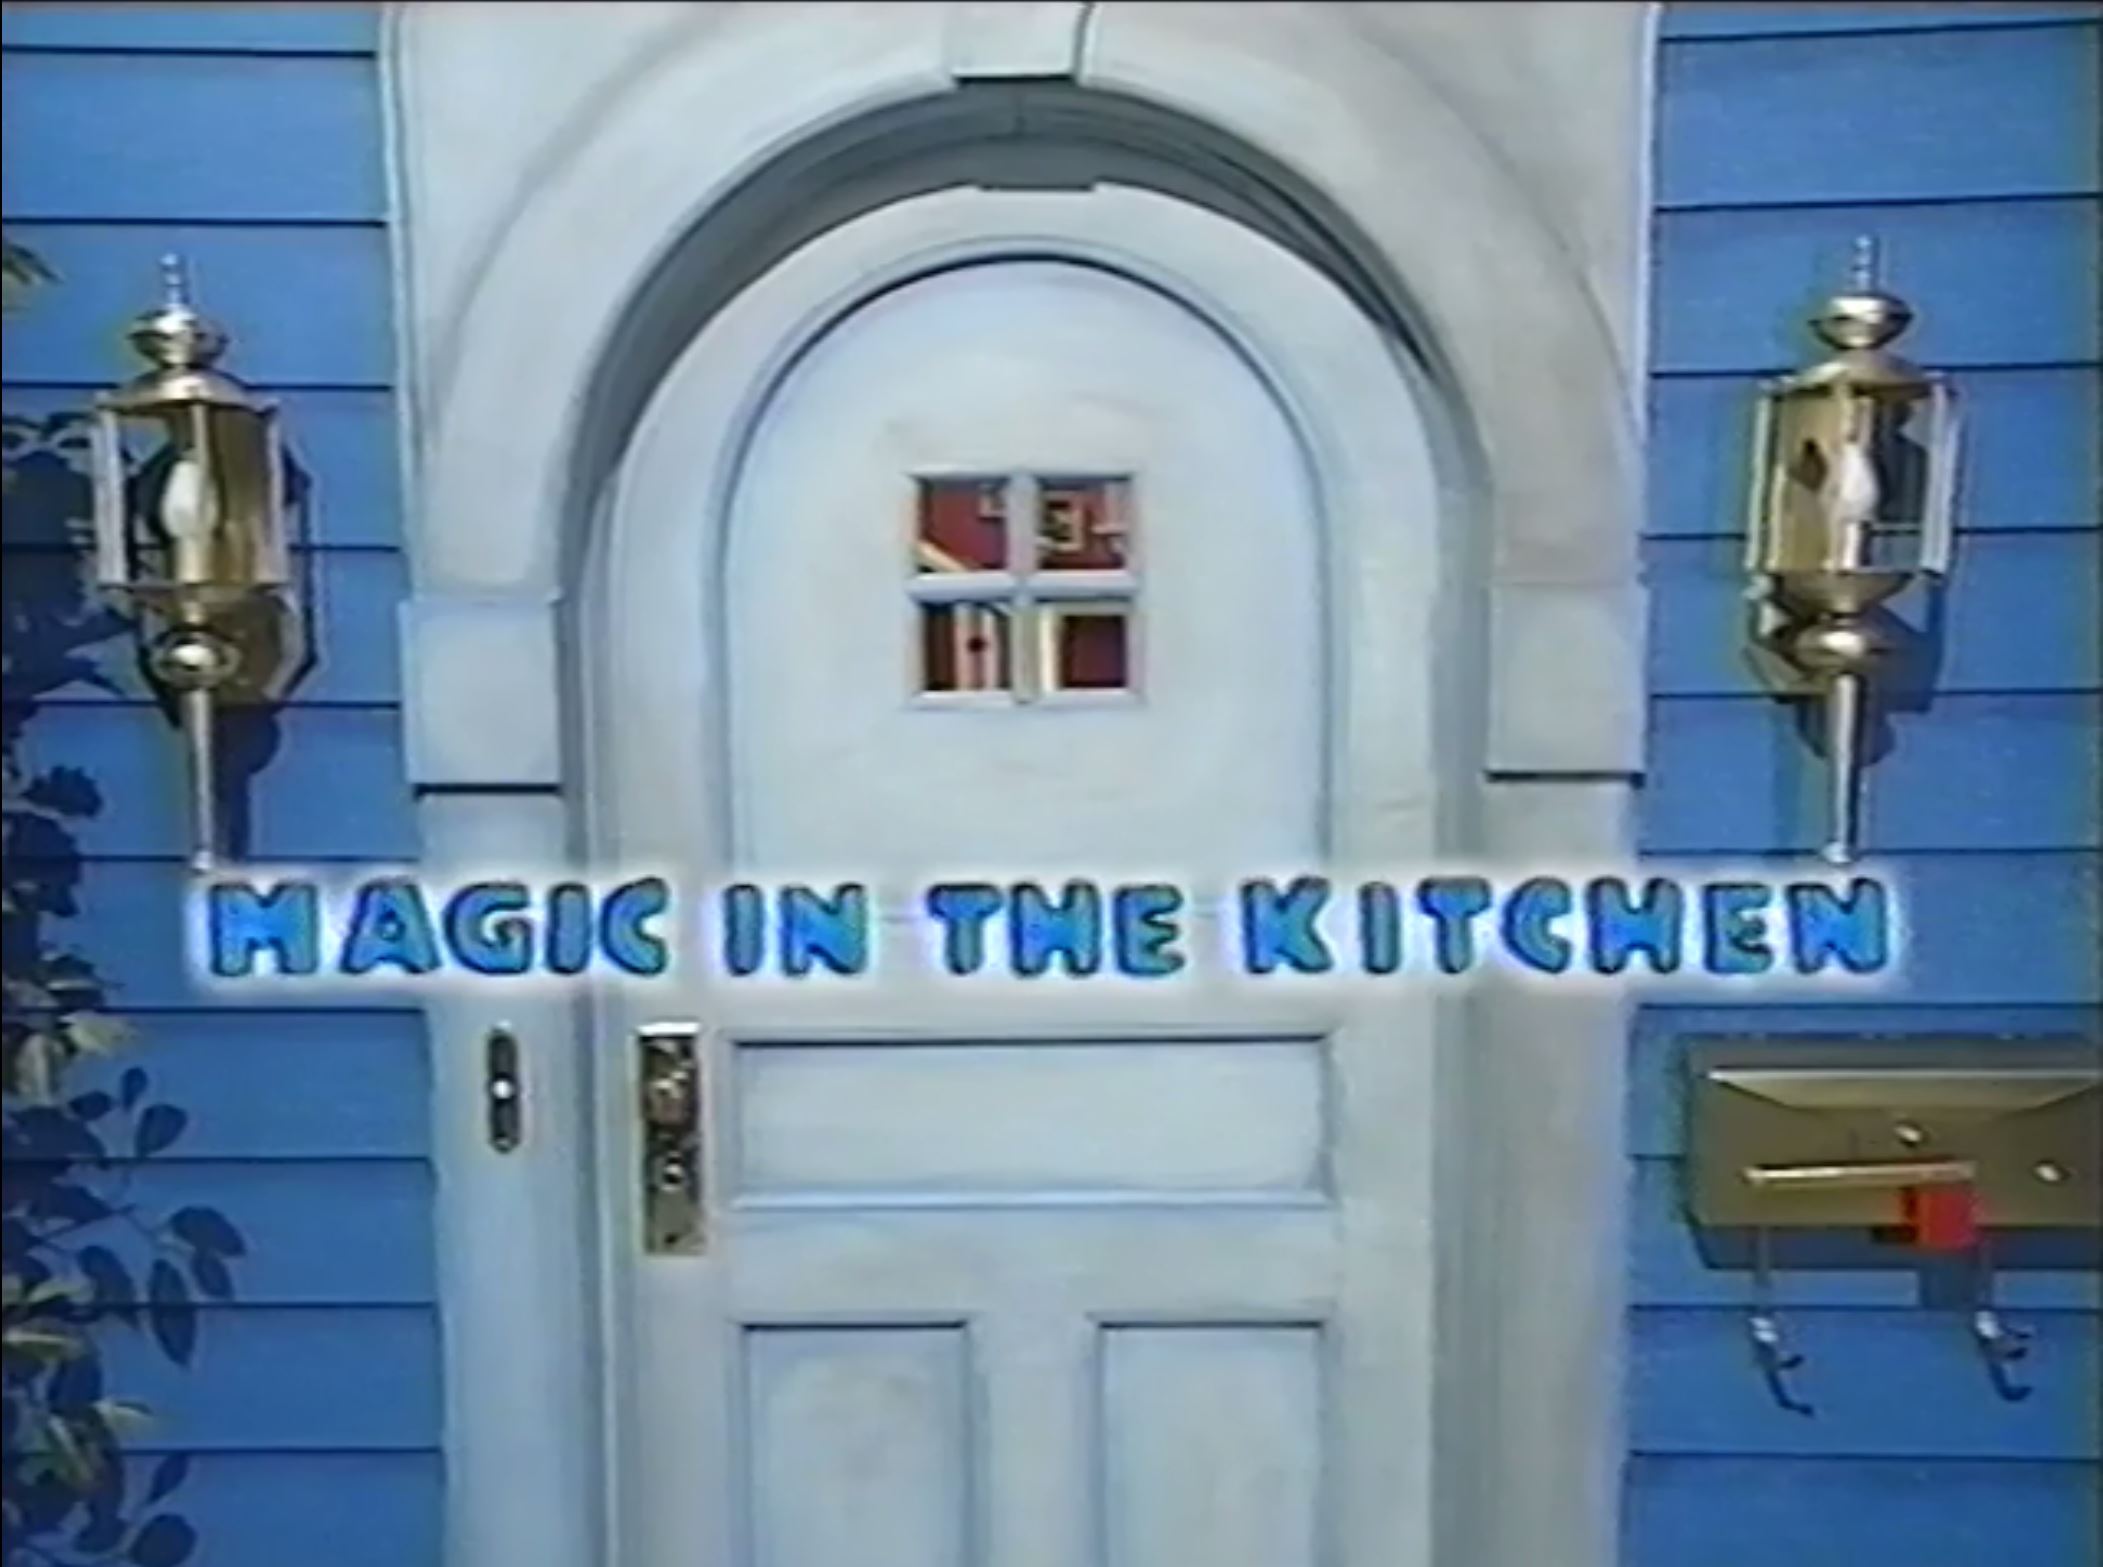 https://static.wikia.nocookie.net/disney/images/5/51/Magic_in_the_Kitchen.jpg/revision/latest?cb=20181114035208